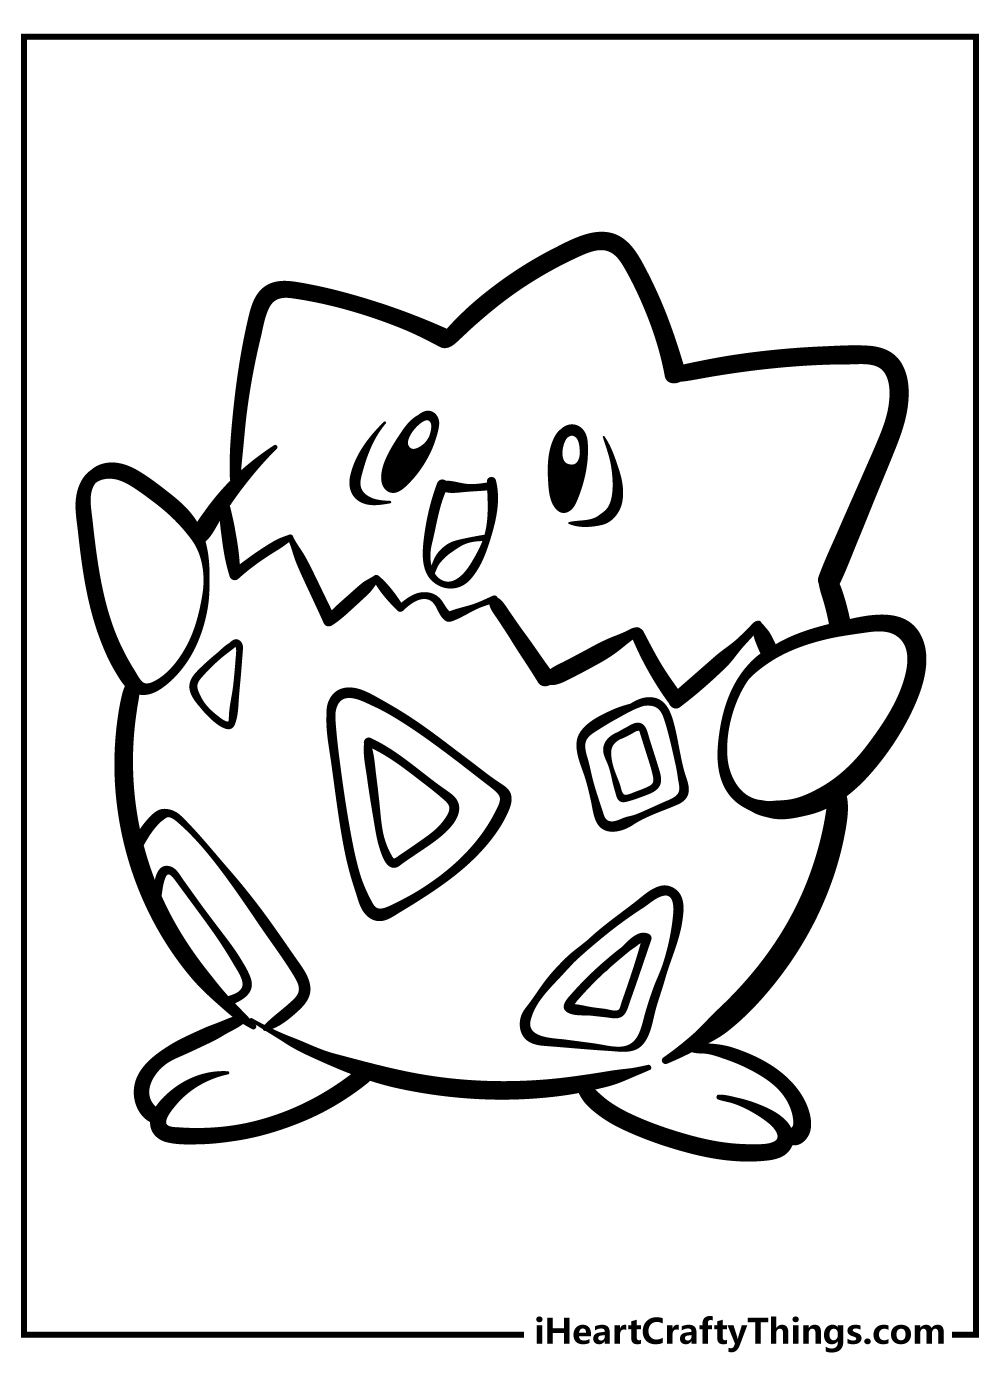 Pokemon Coloring Pages for preschoolers free printable